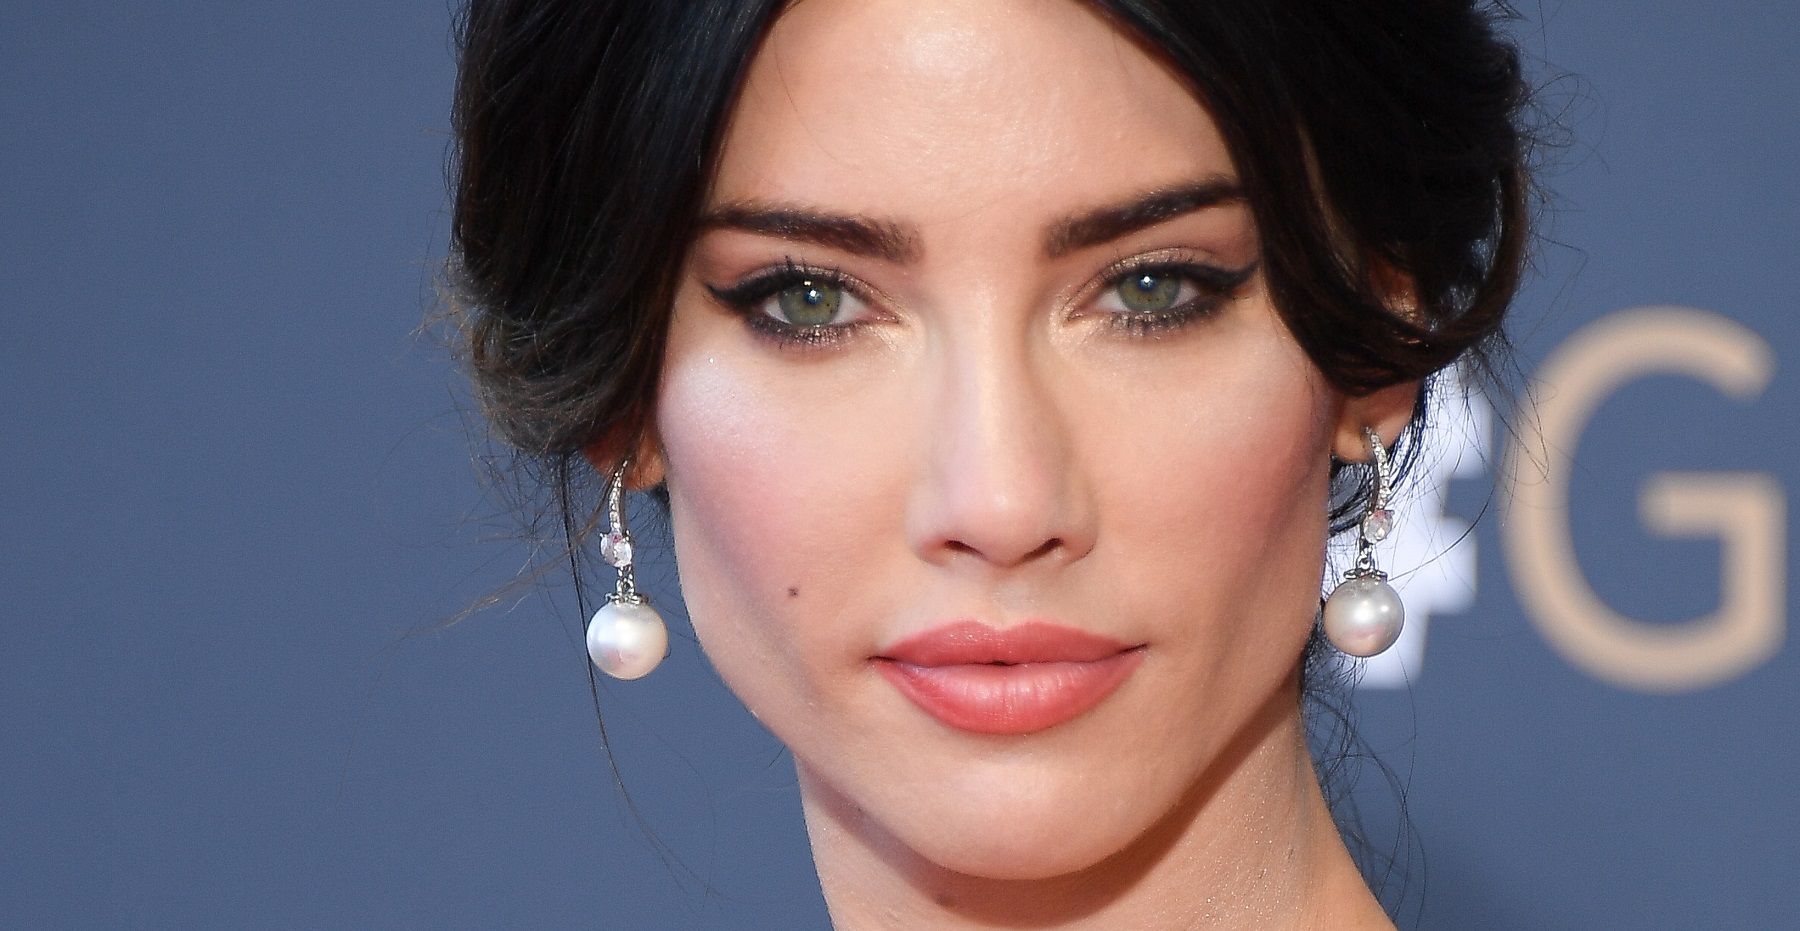 The Bold and the Beautiful speculation focuses on Steffy, who is pictured here in a headshot wearing drop-down pearl and diamond earrings and an upswept hairdo